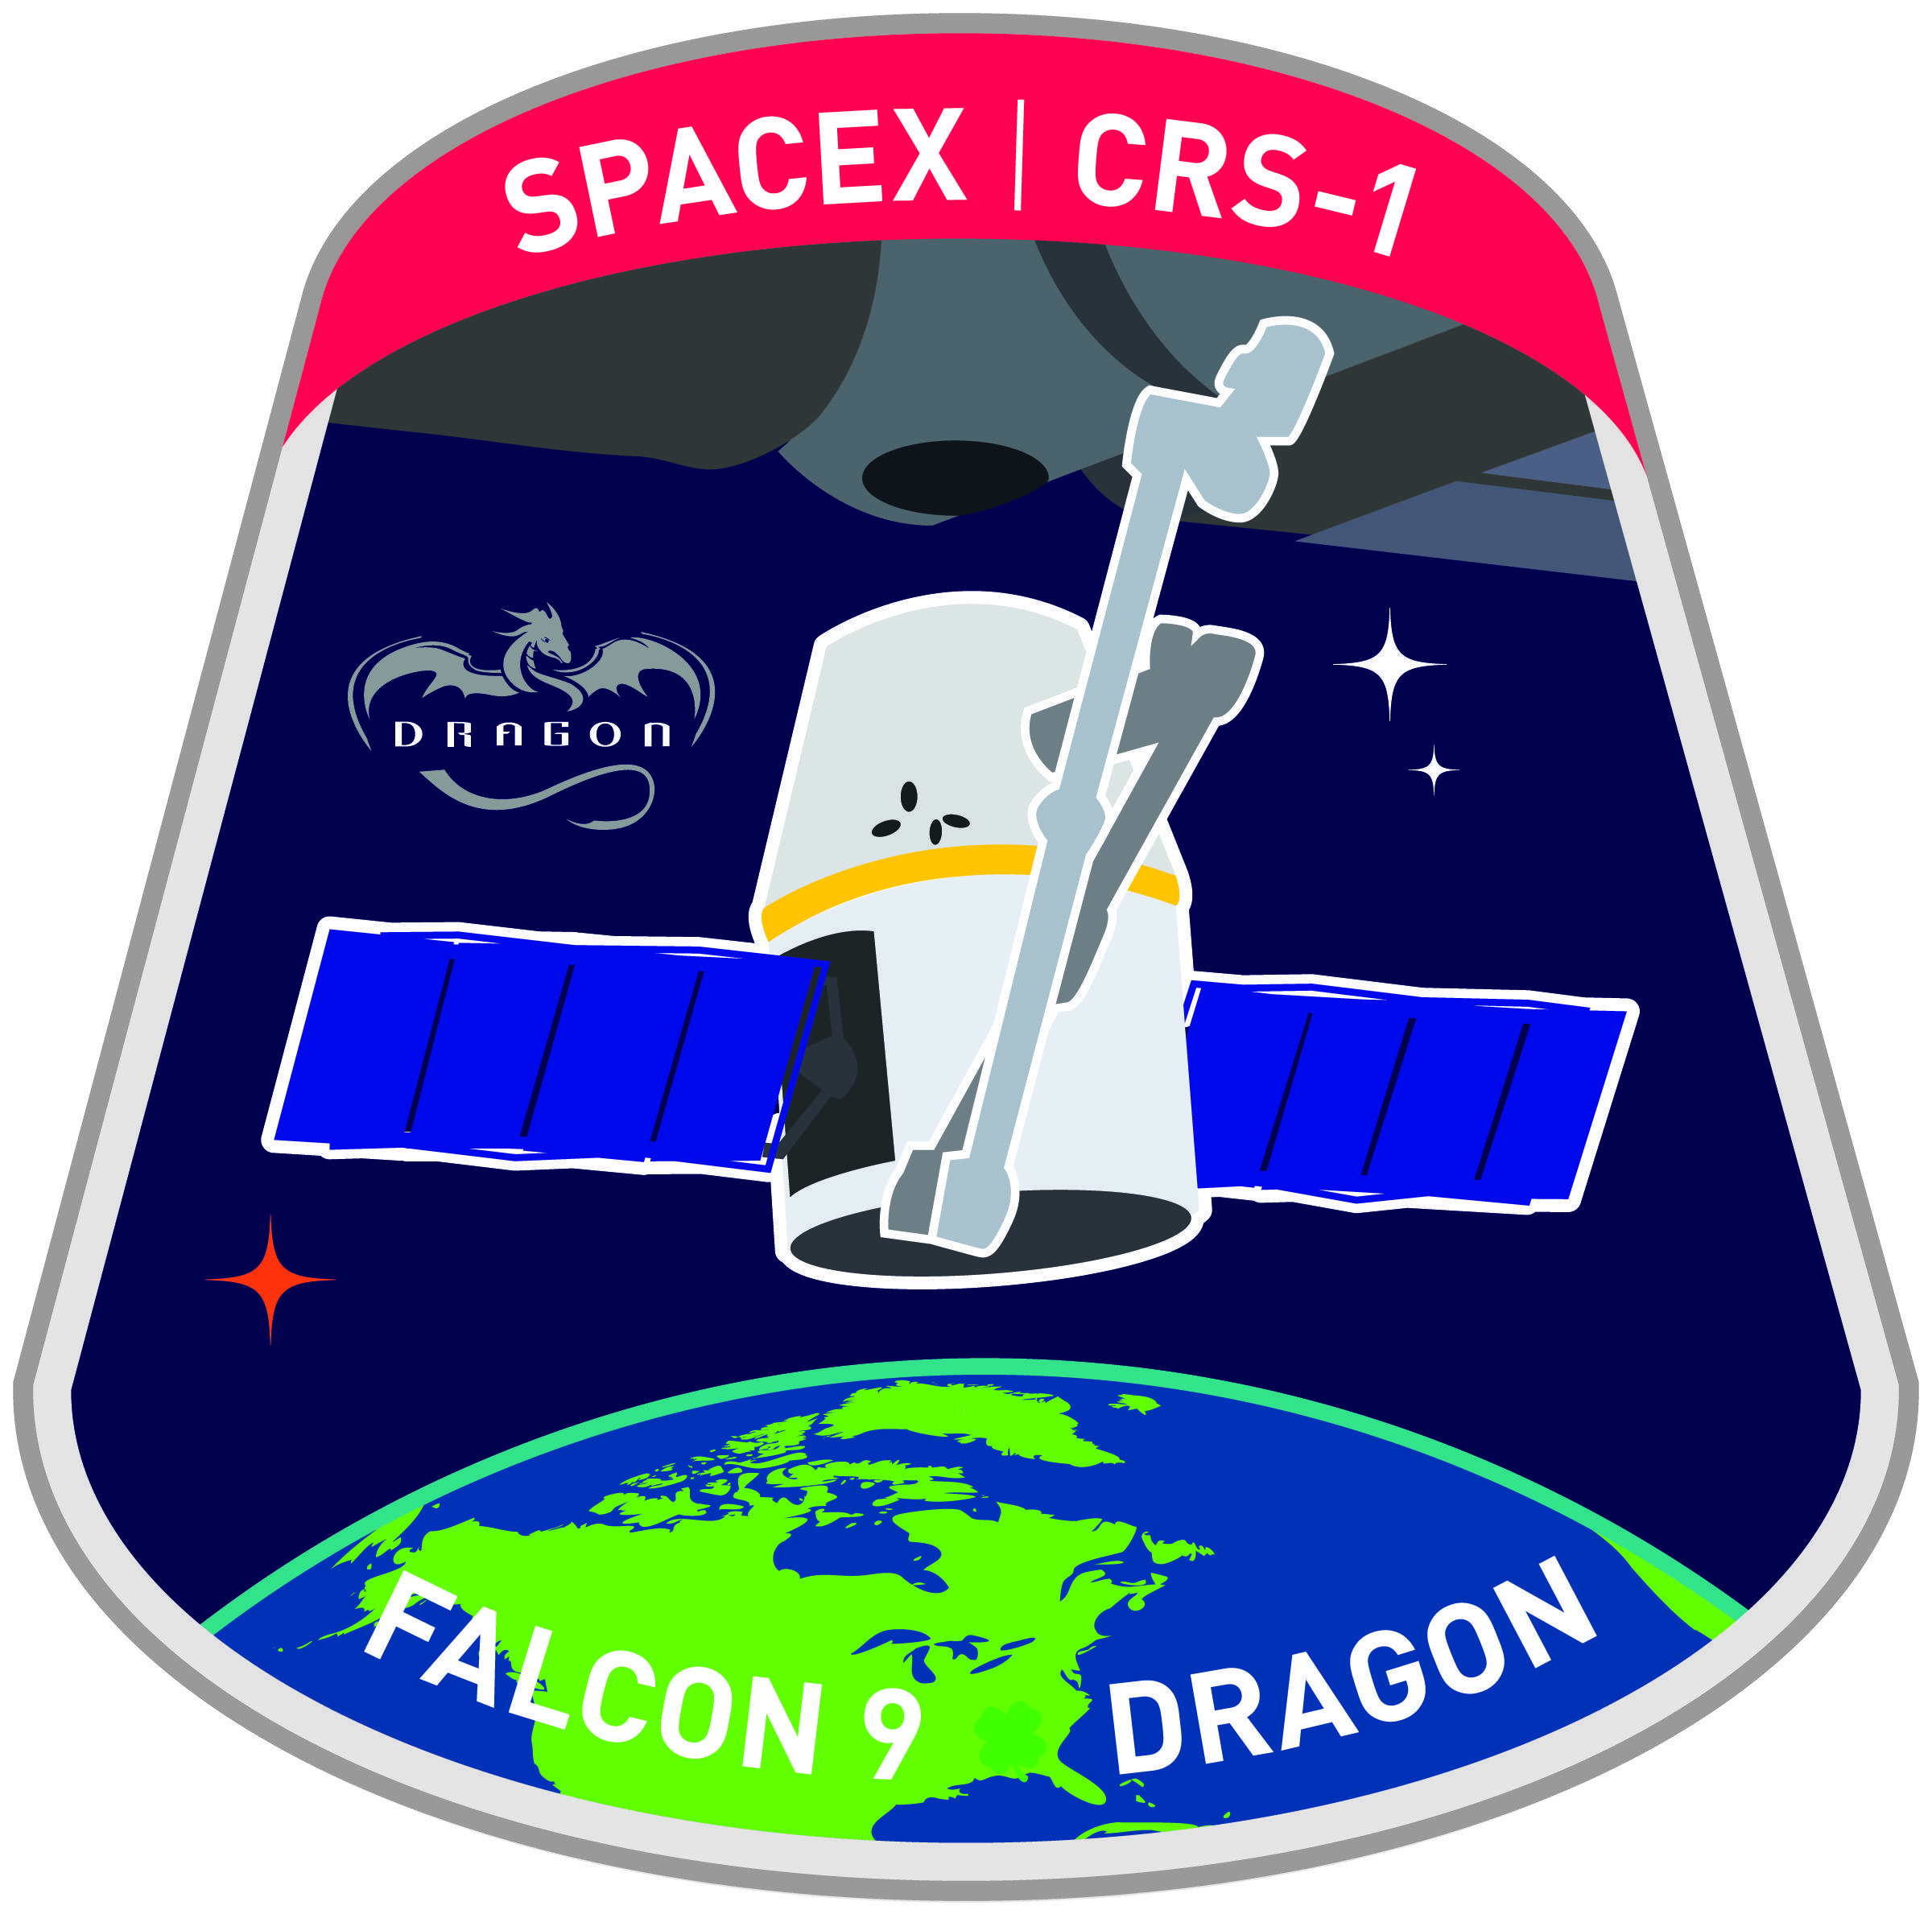 SpaceX Mission Logo - Summary of the First SpaceX Commercial Resupply Mission to ISS